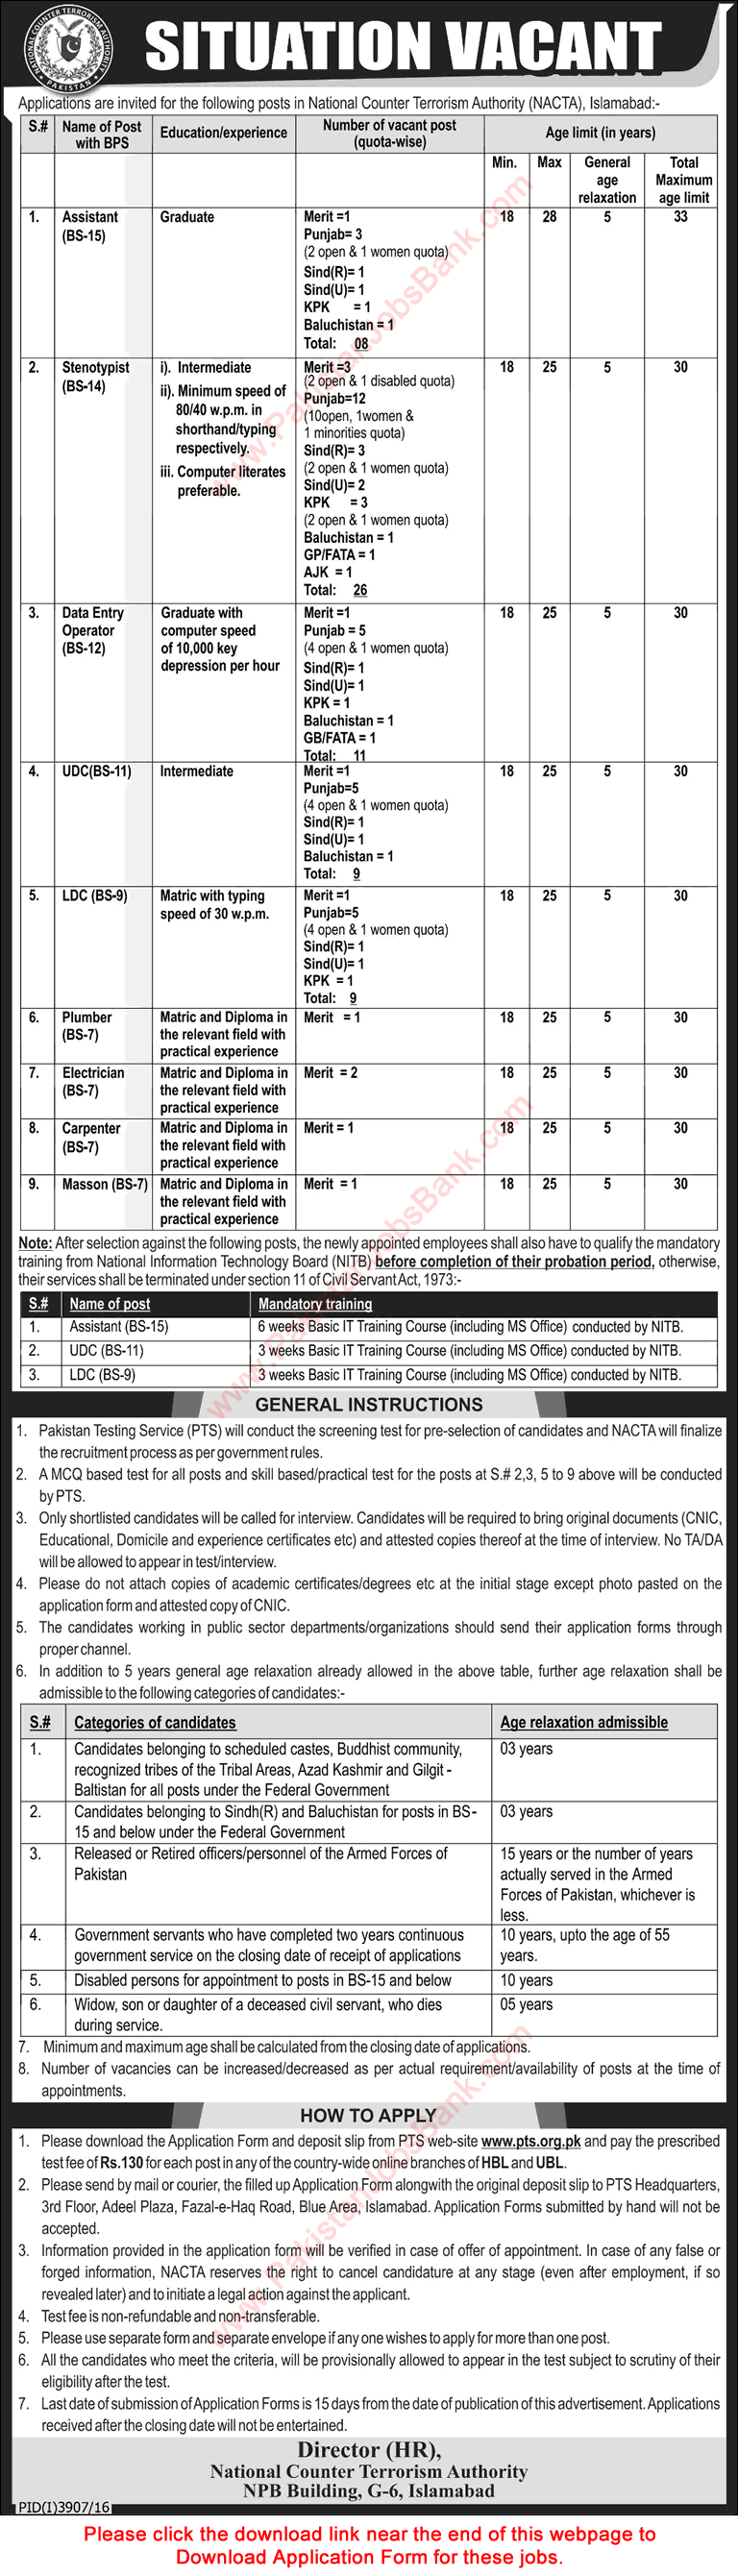 NACTA Islamabad Jobs 2017 PTS Application Form National Counter Terrorism Authority Stenotypists & Others Latest